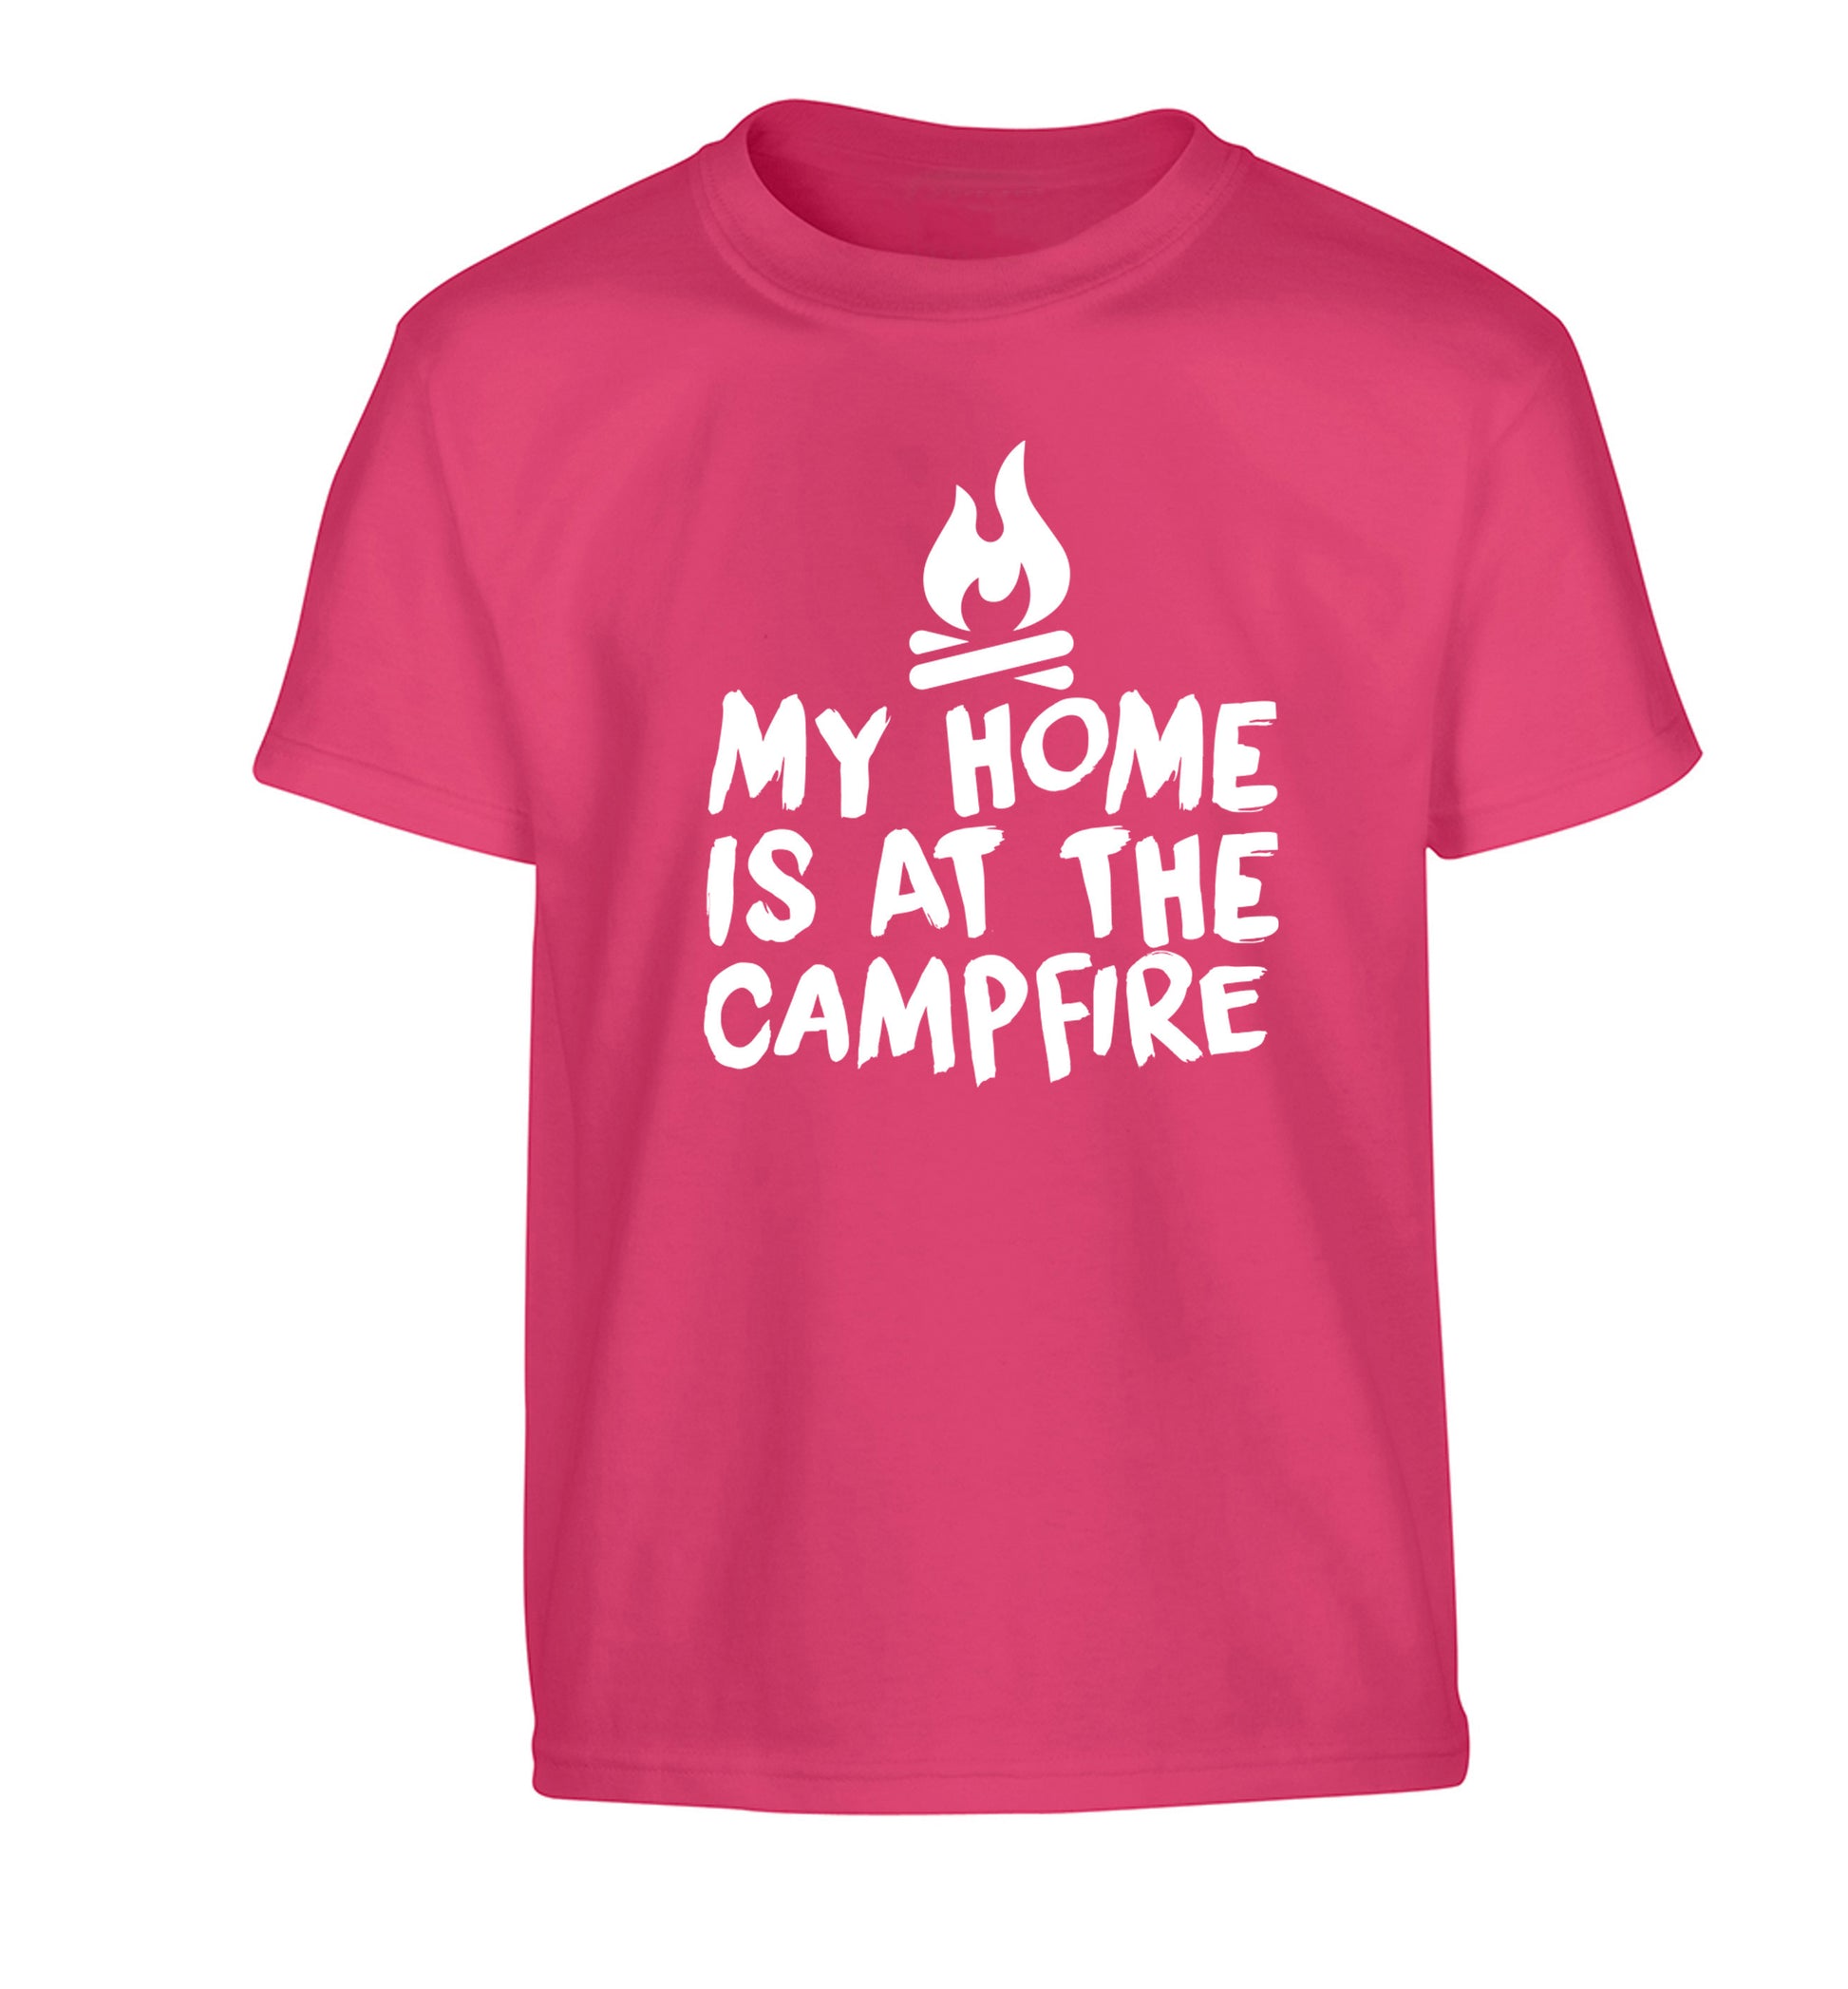 My home is at the campfire Children's pink Tshirt 12-14 Years